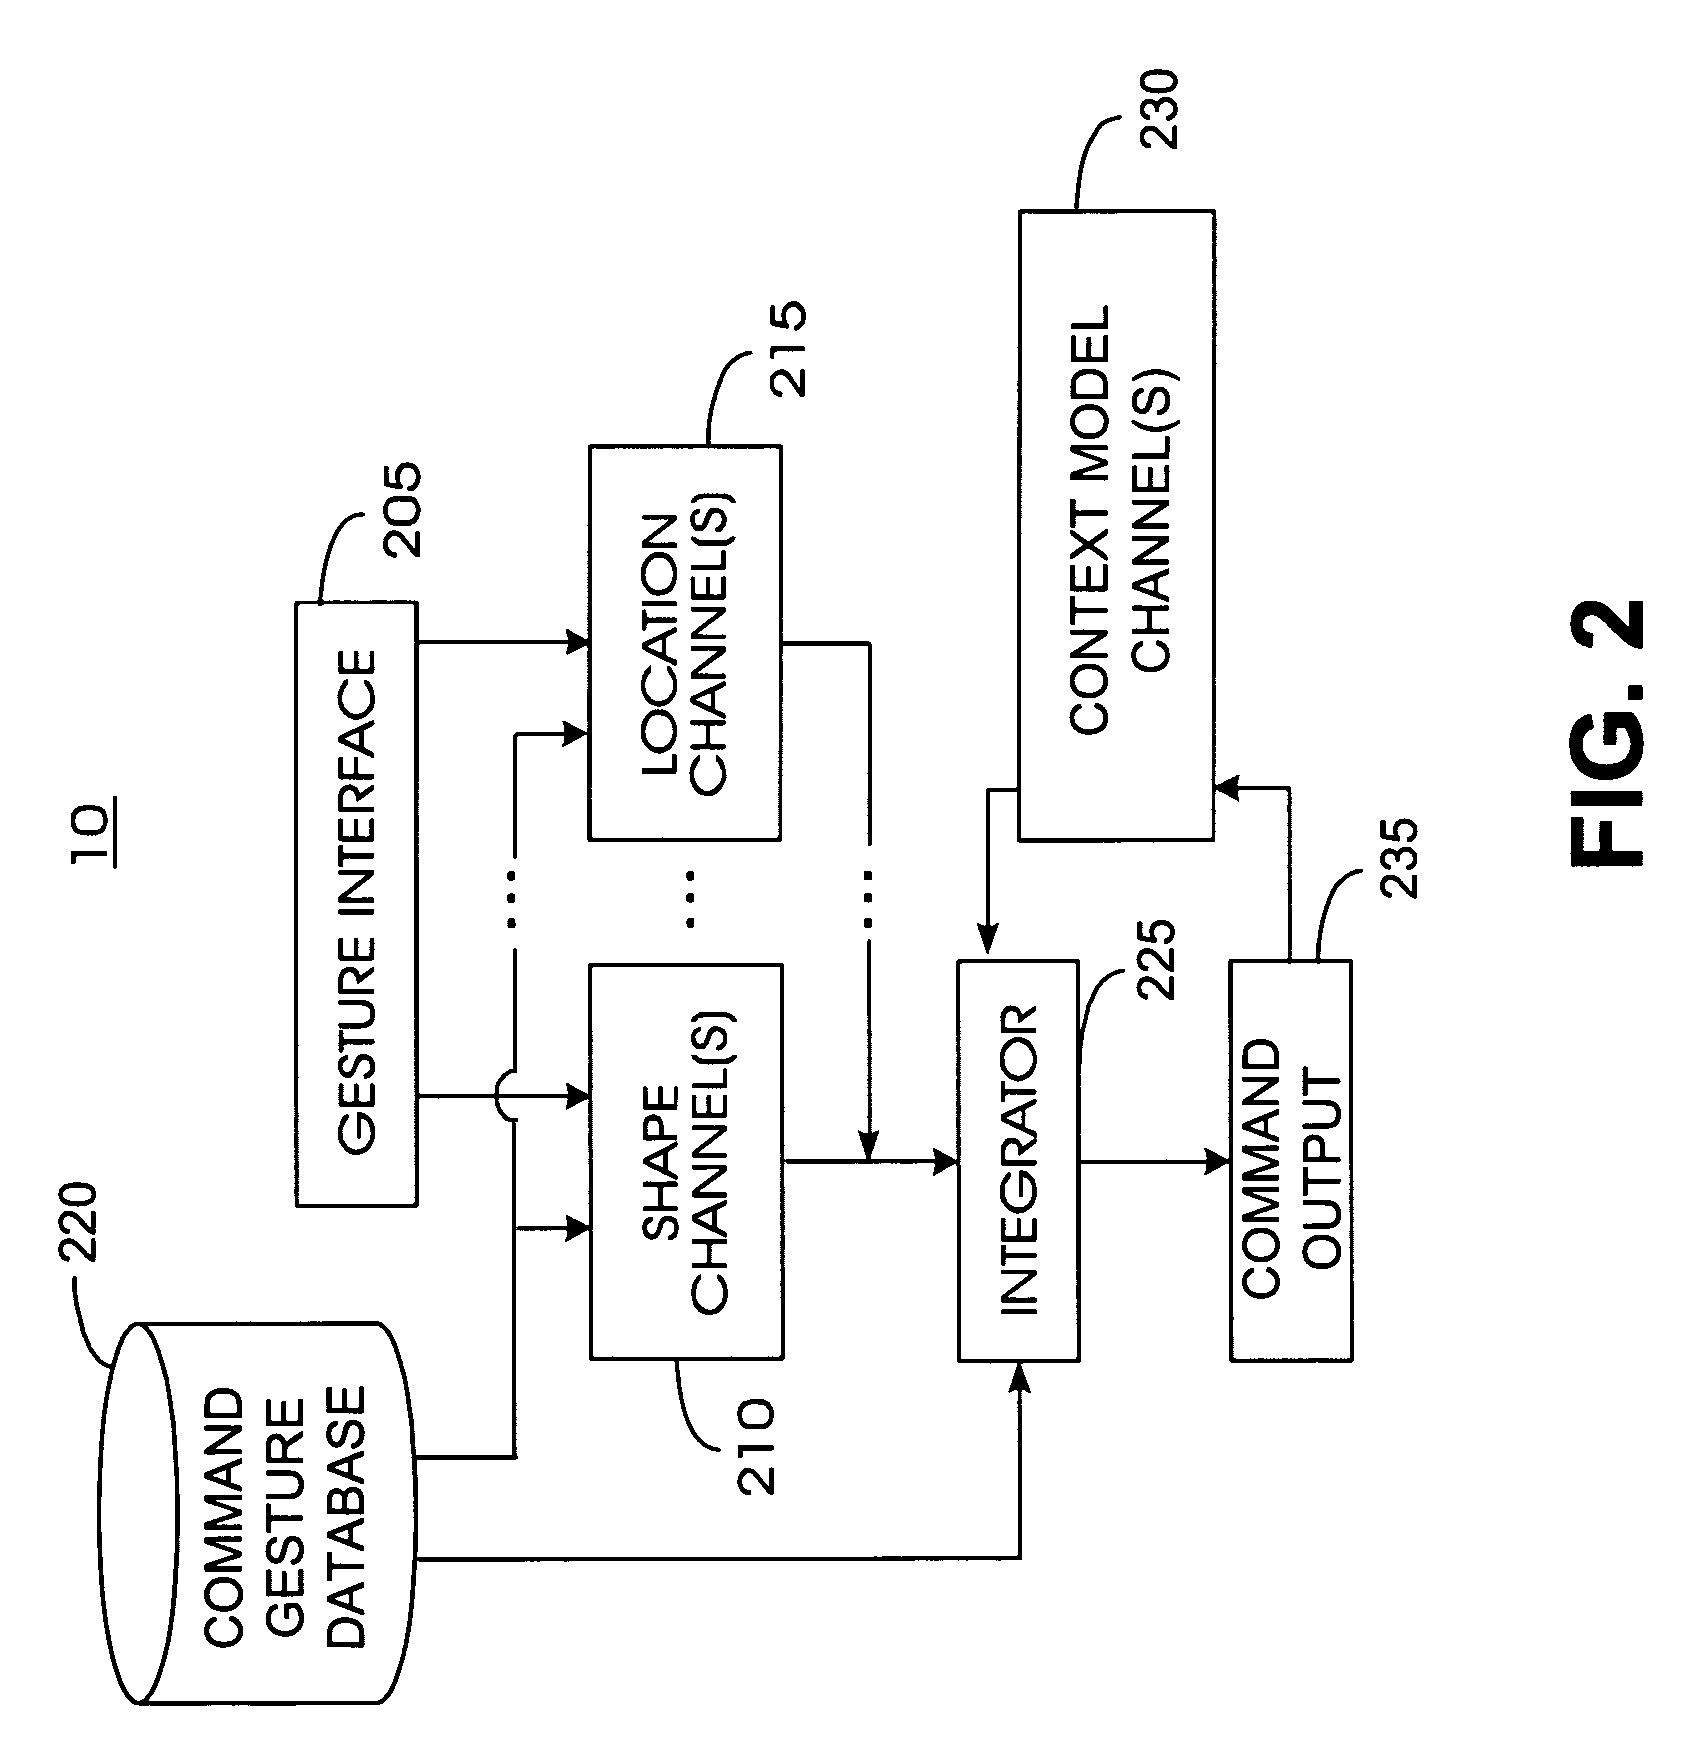 System and method for issuing commands based on pen motions on a graphical keyboard